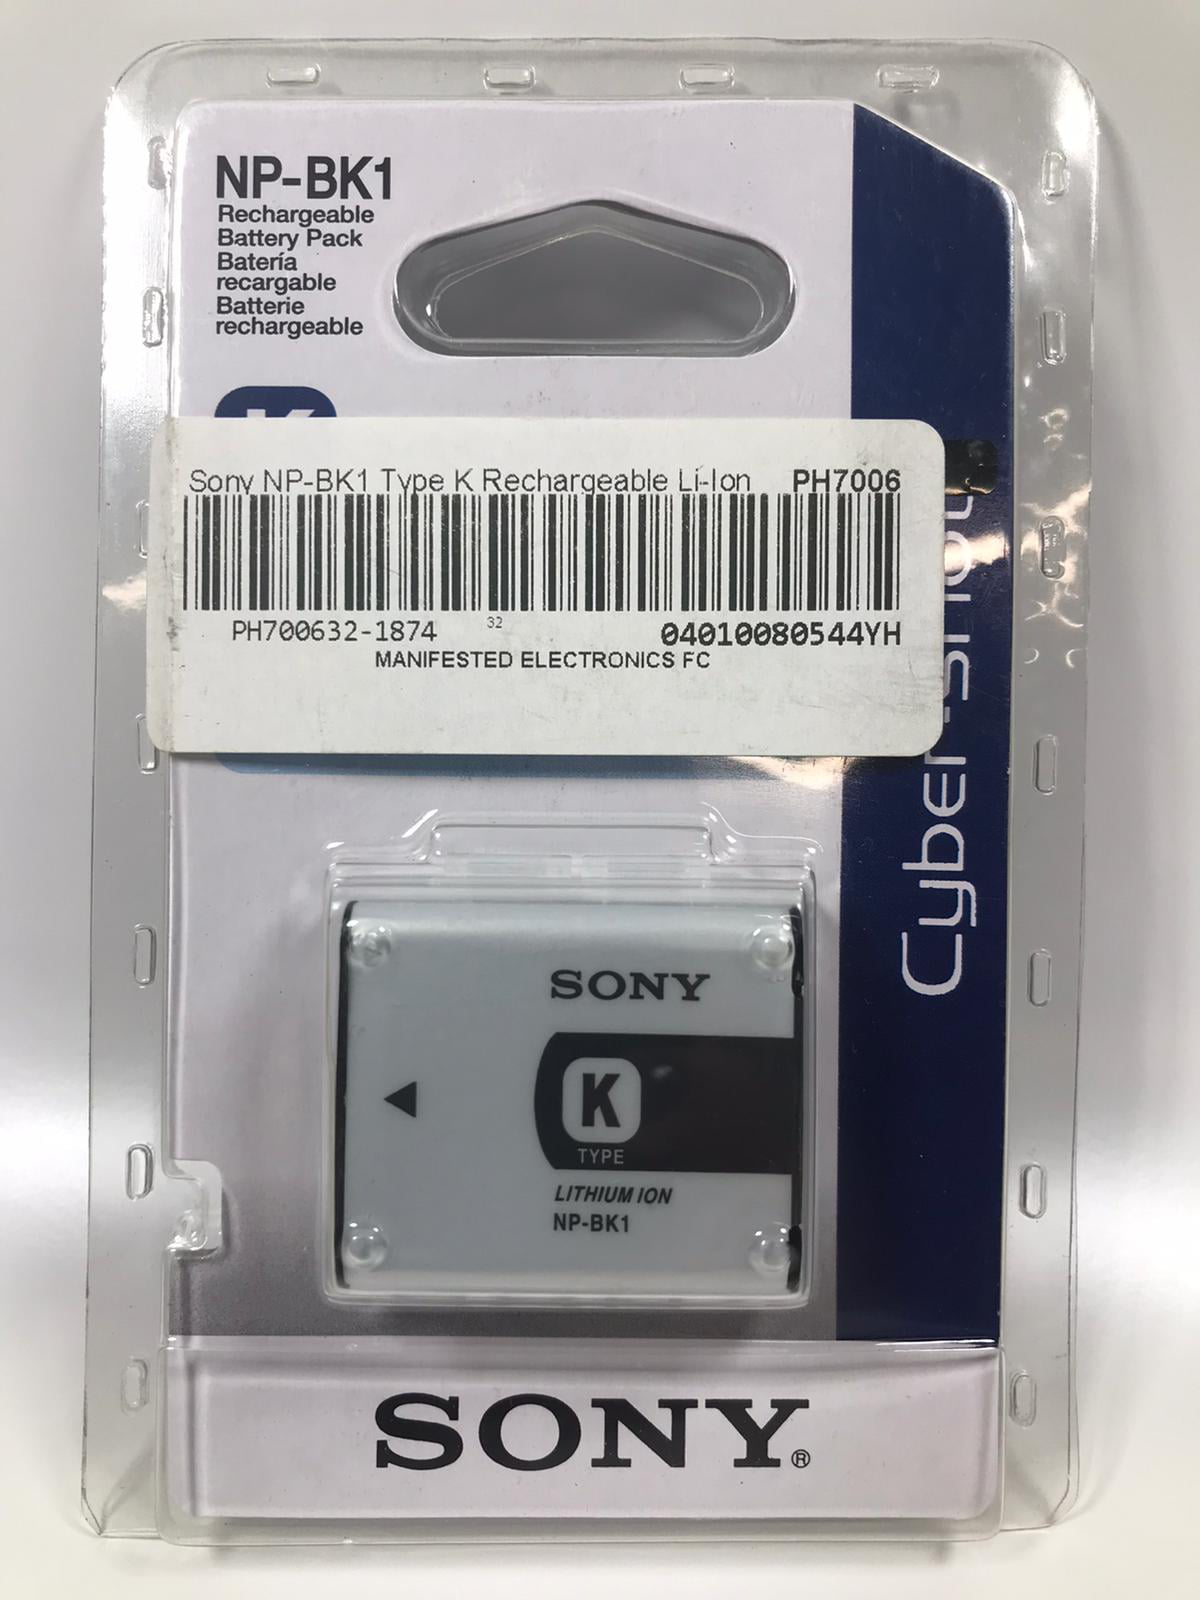 Sony NP-BK1 Rechargebale Battery Pack For Cybershot Cameras 